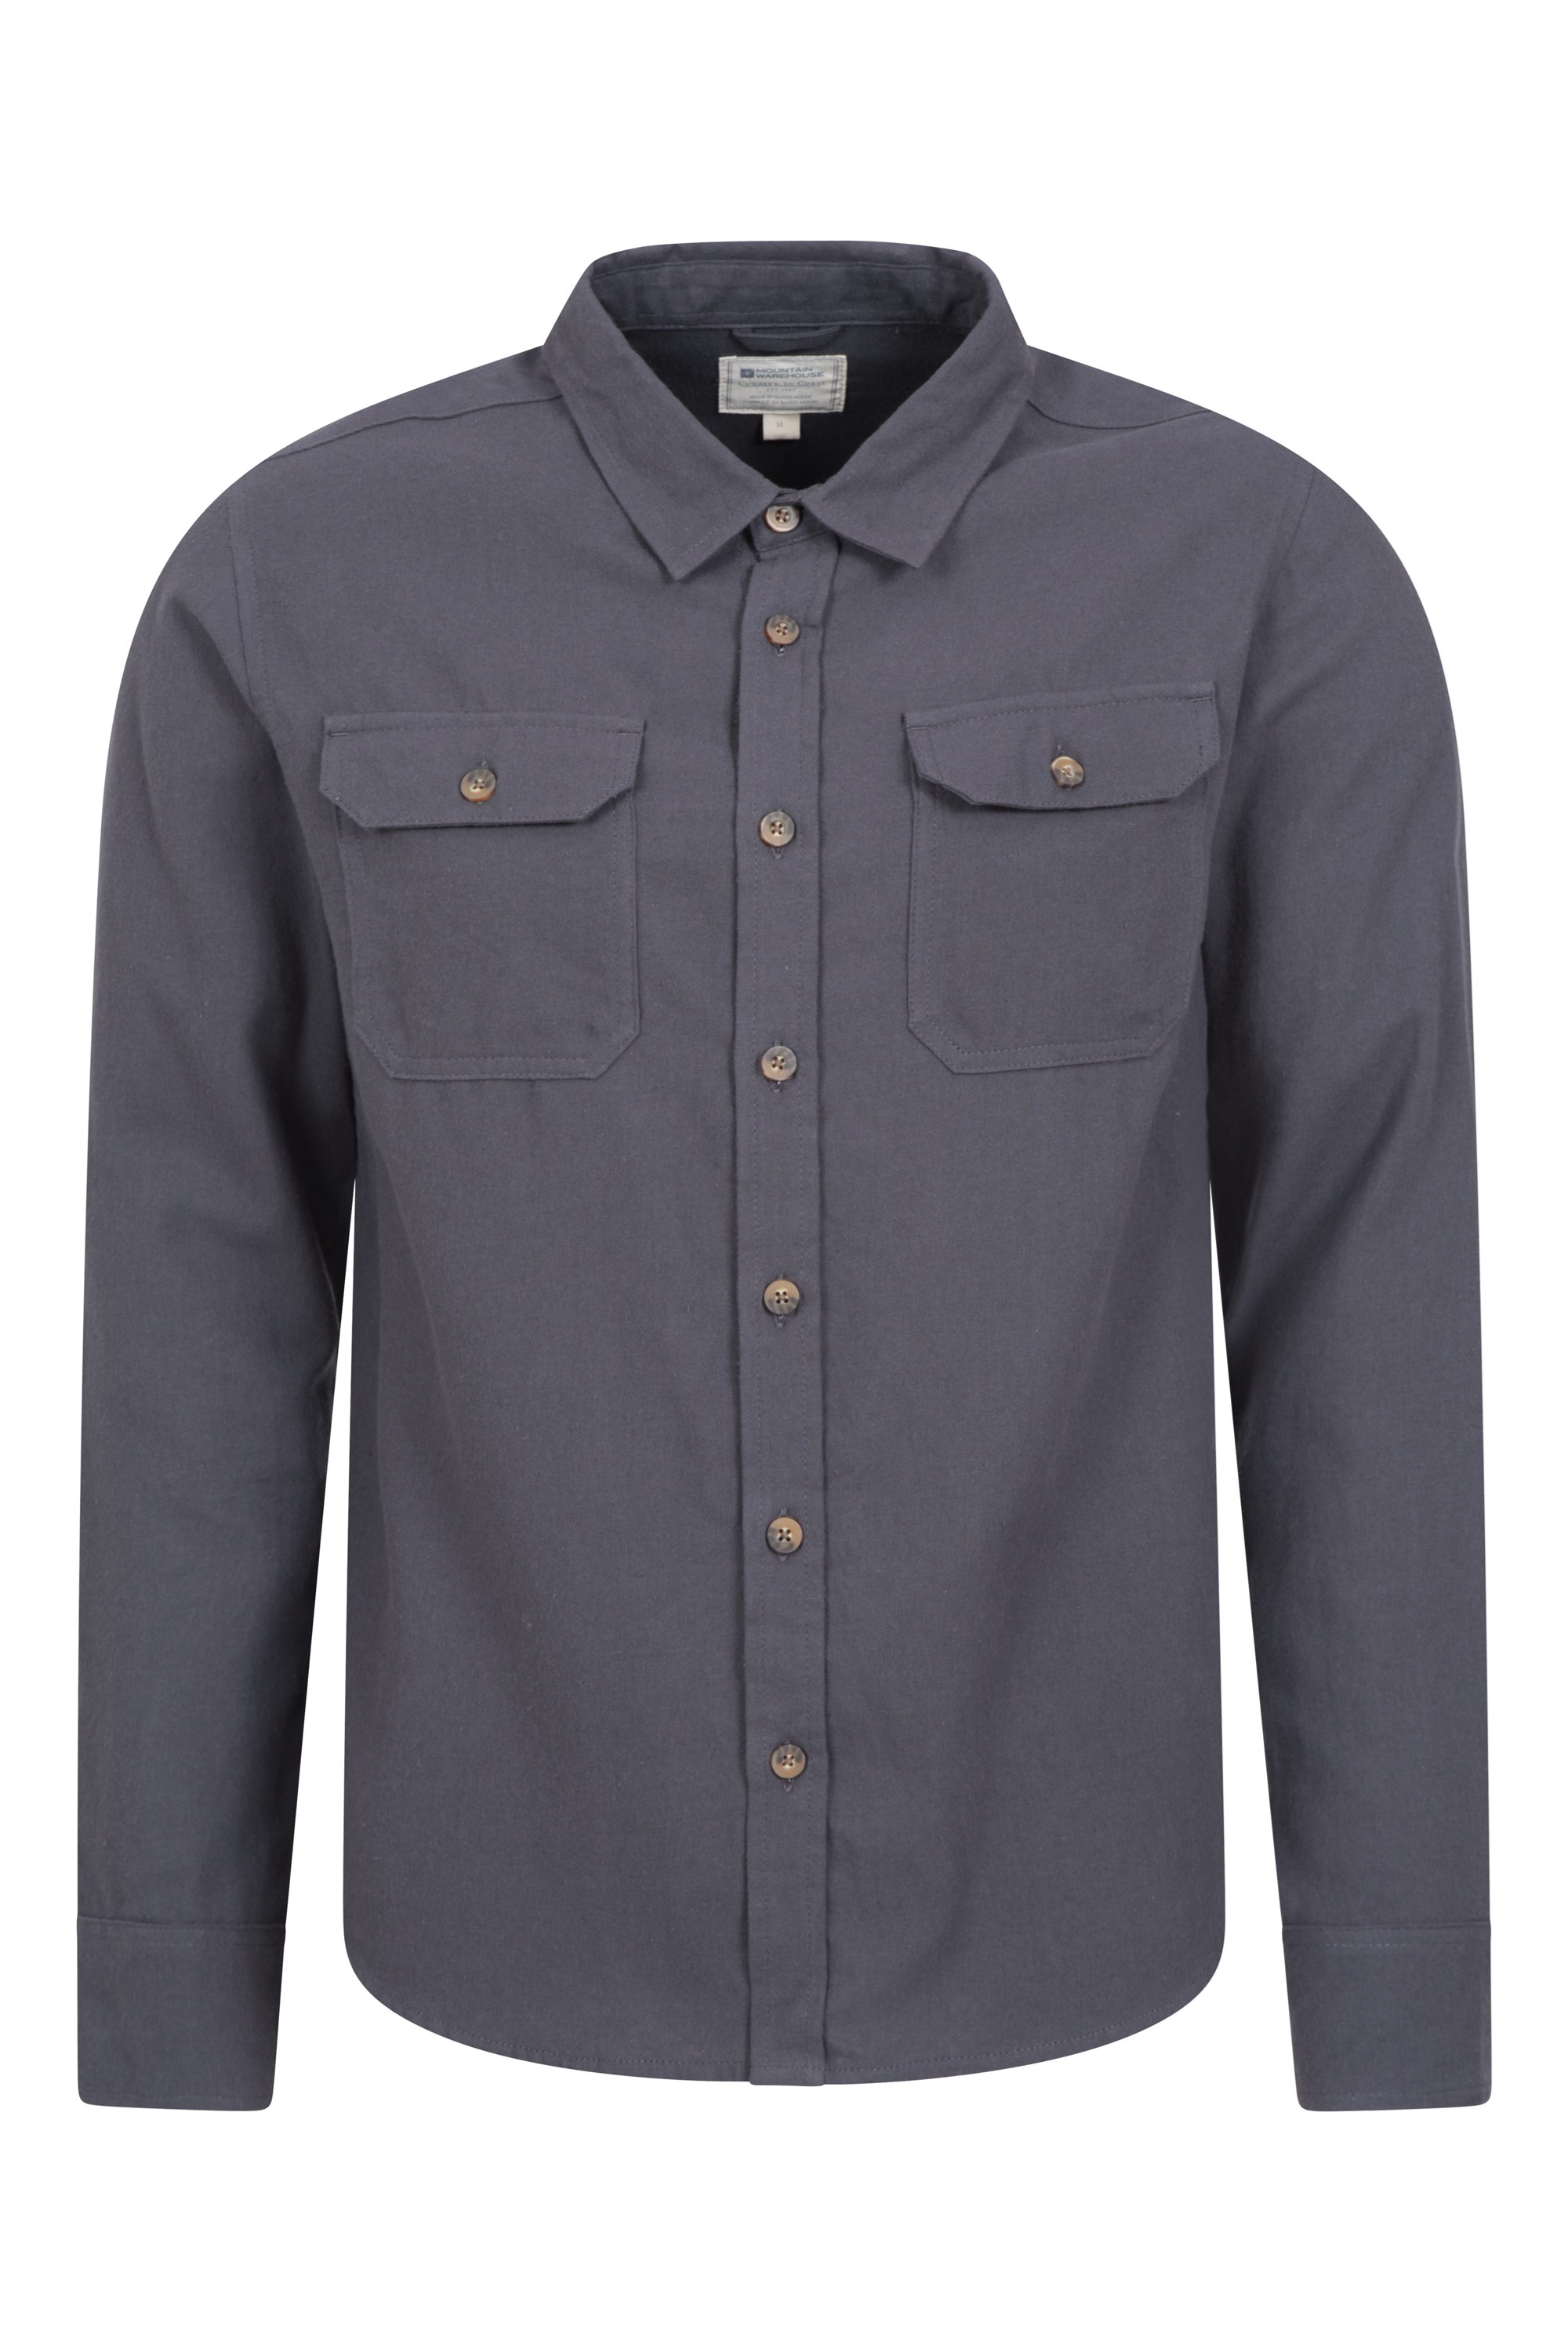 Trace Mens Flannel Shirt - Grey